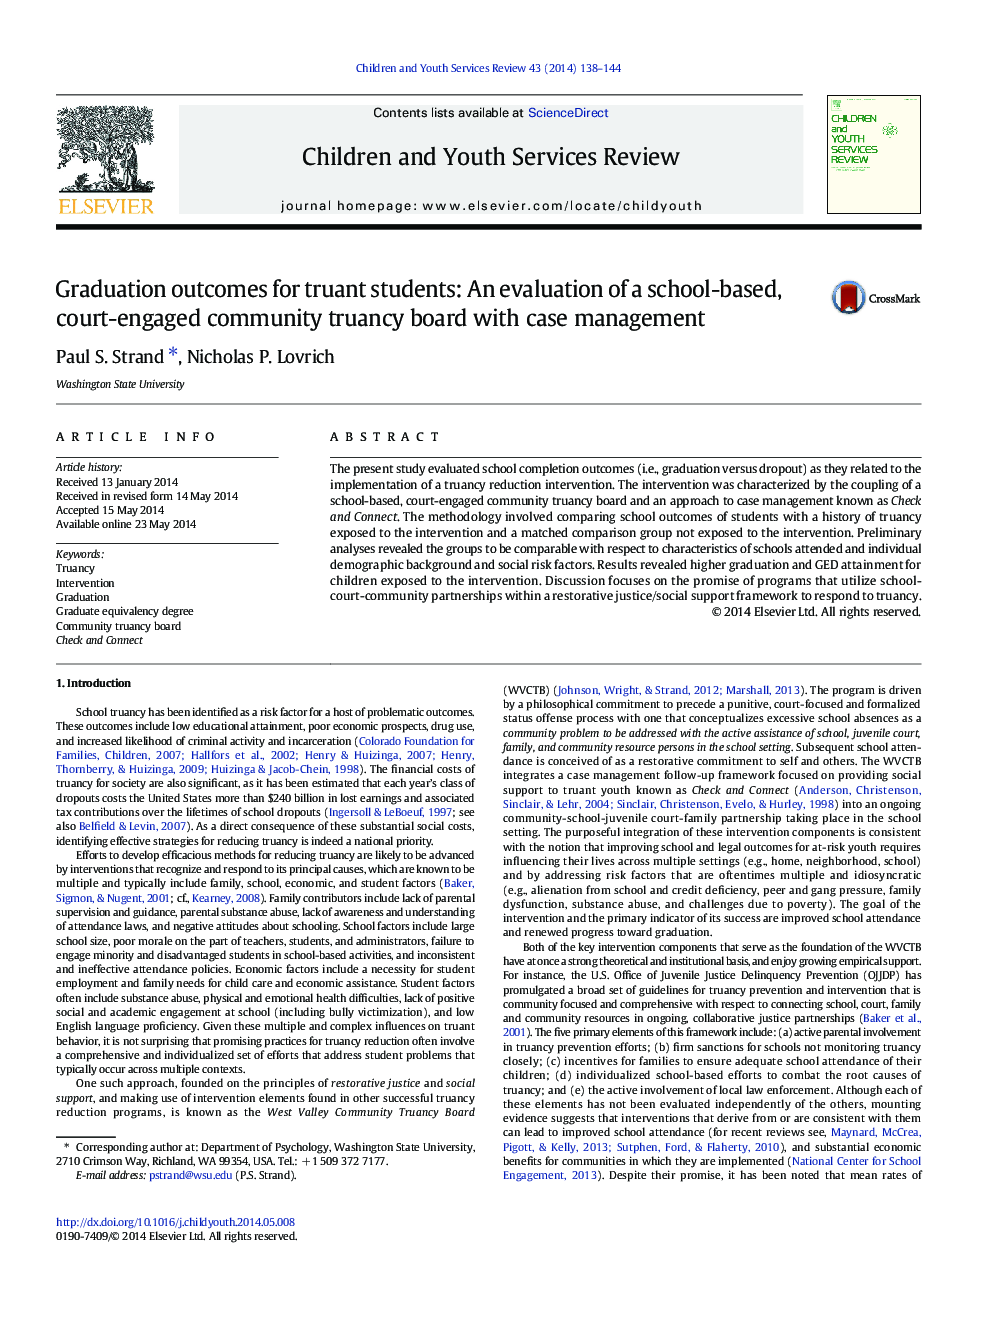 Graduation outcomes for truant students: An evaluation of a school-based, court-engaged community truancy board with case management